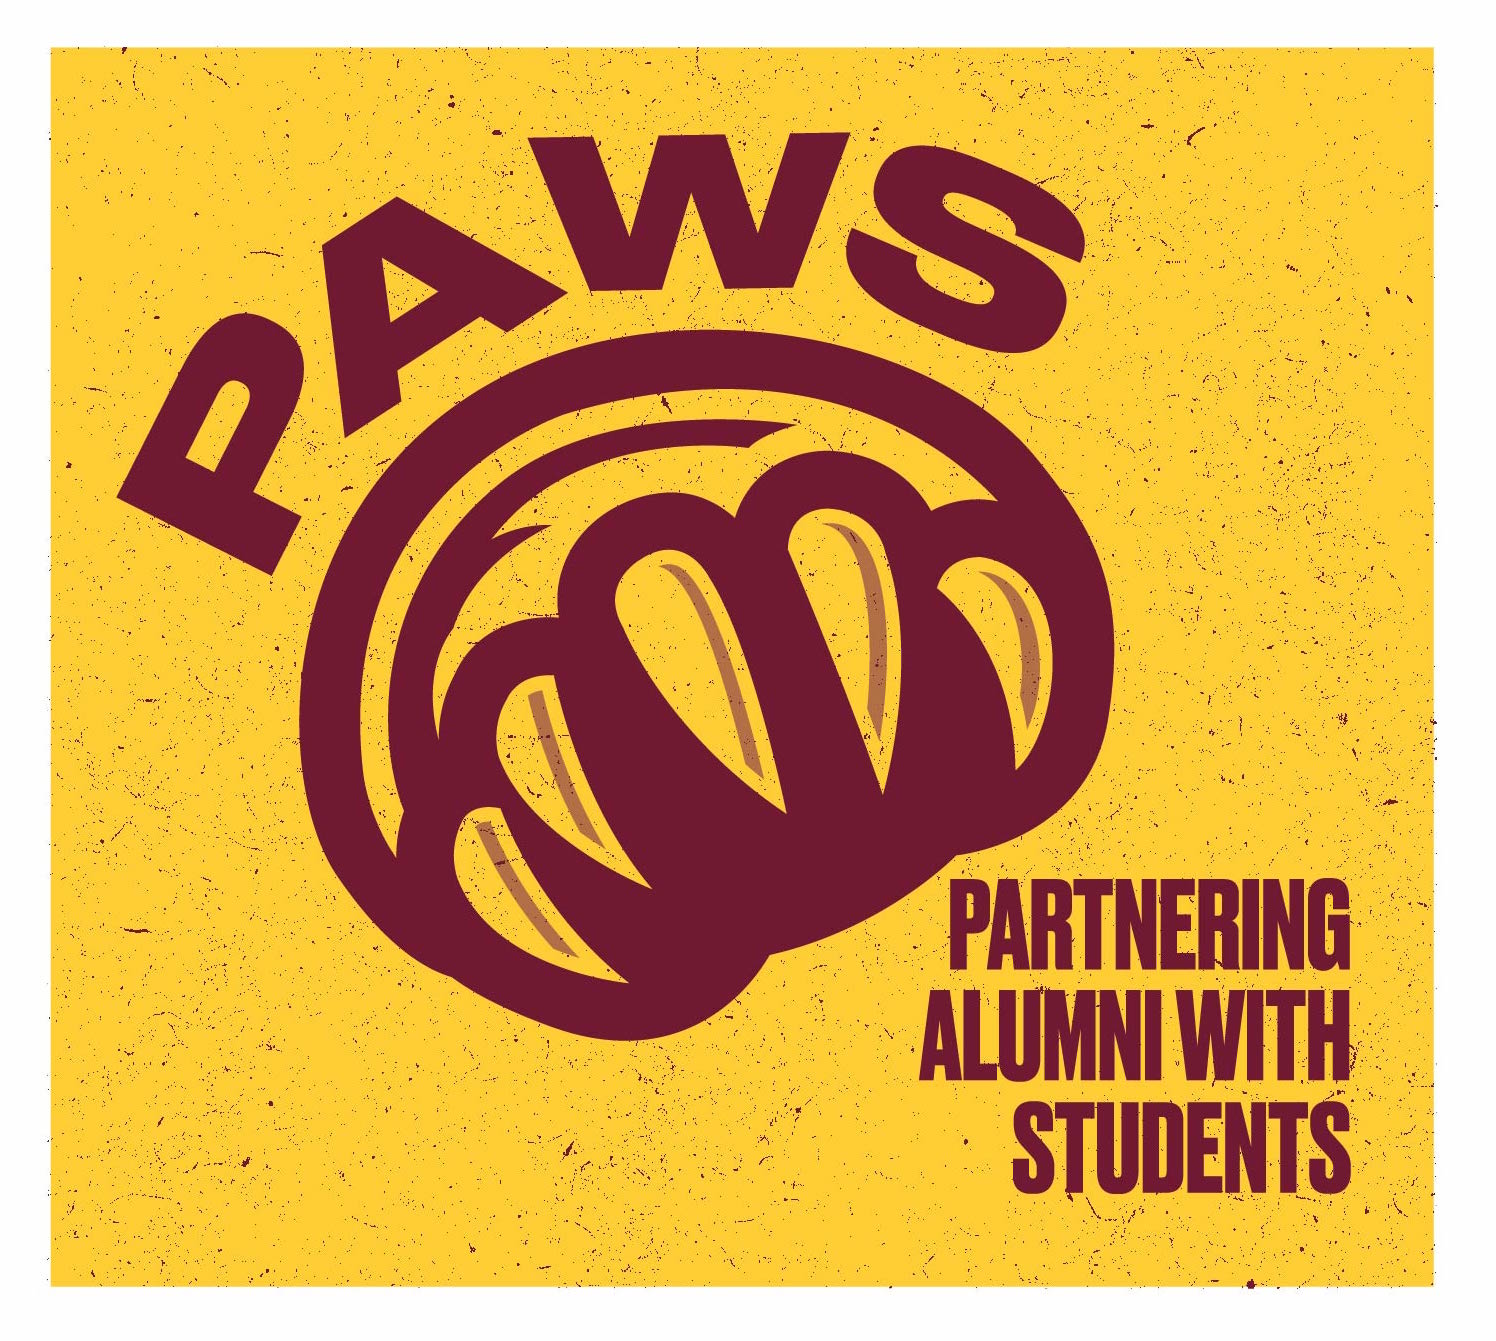 PAWS partnering alumni with students